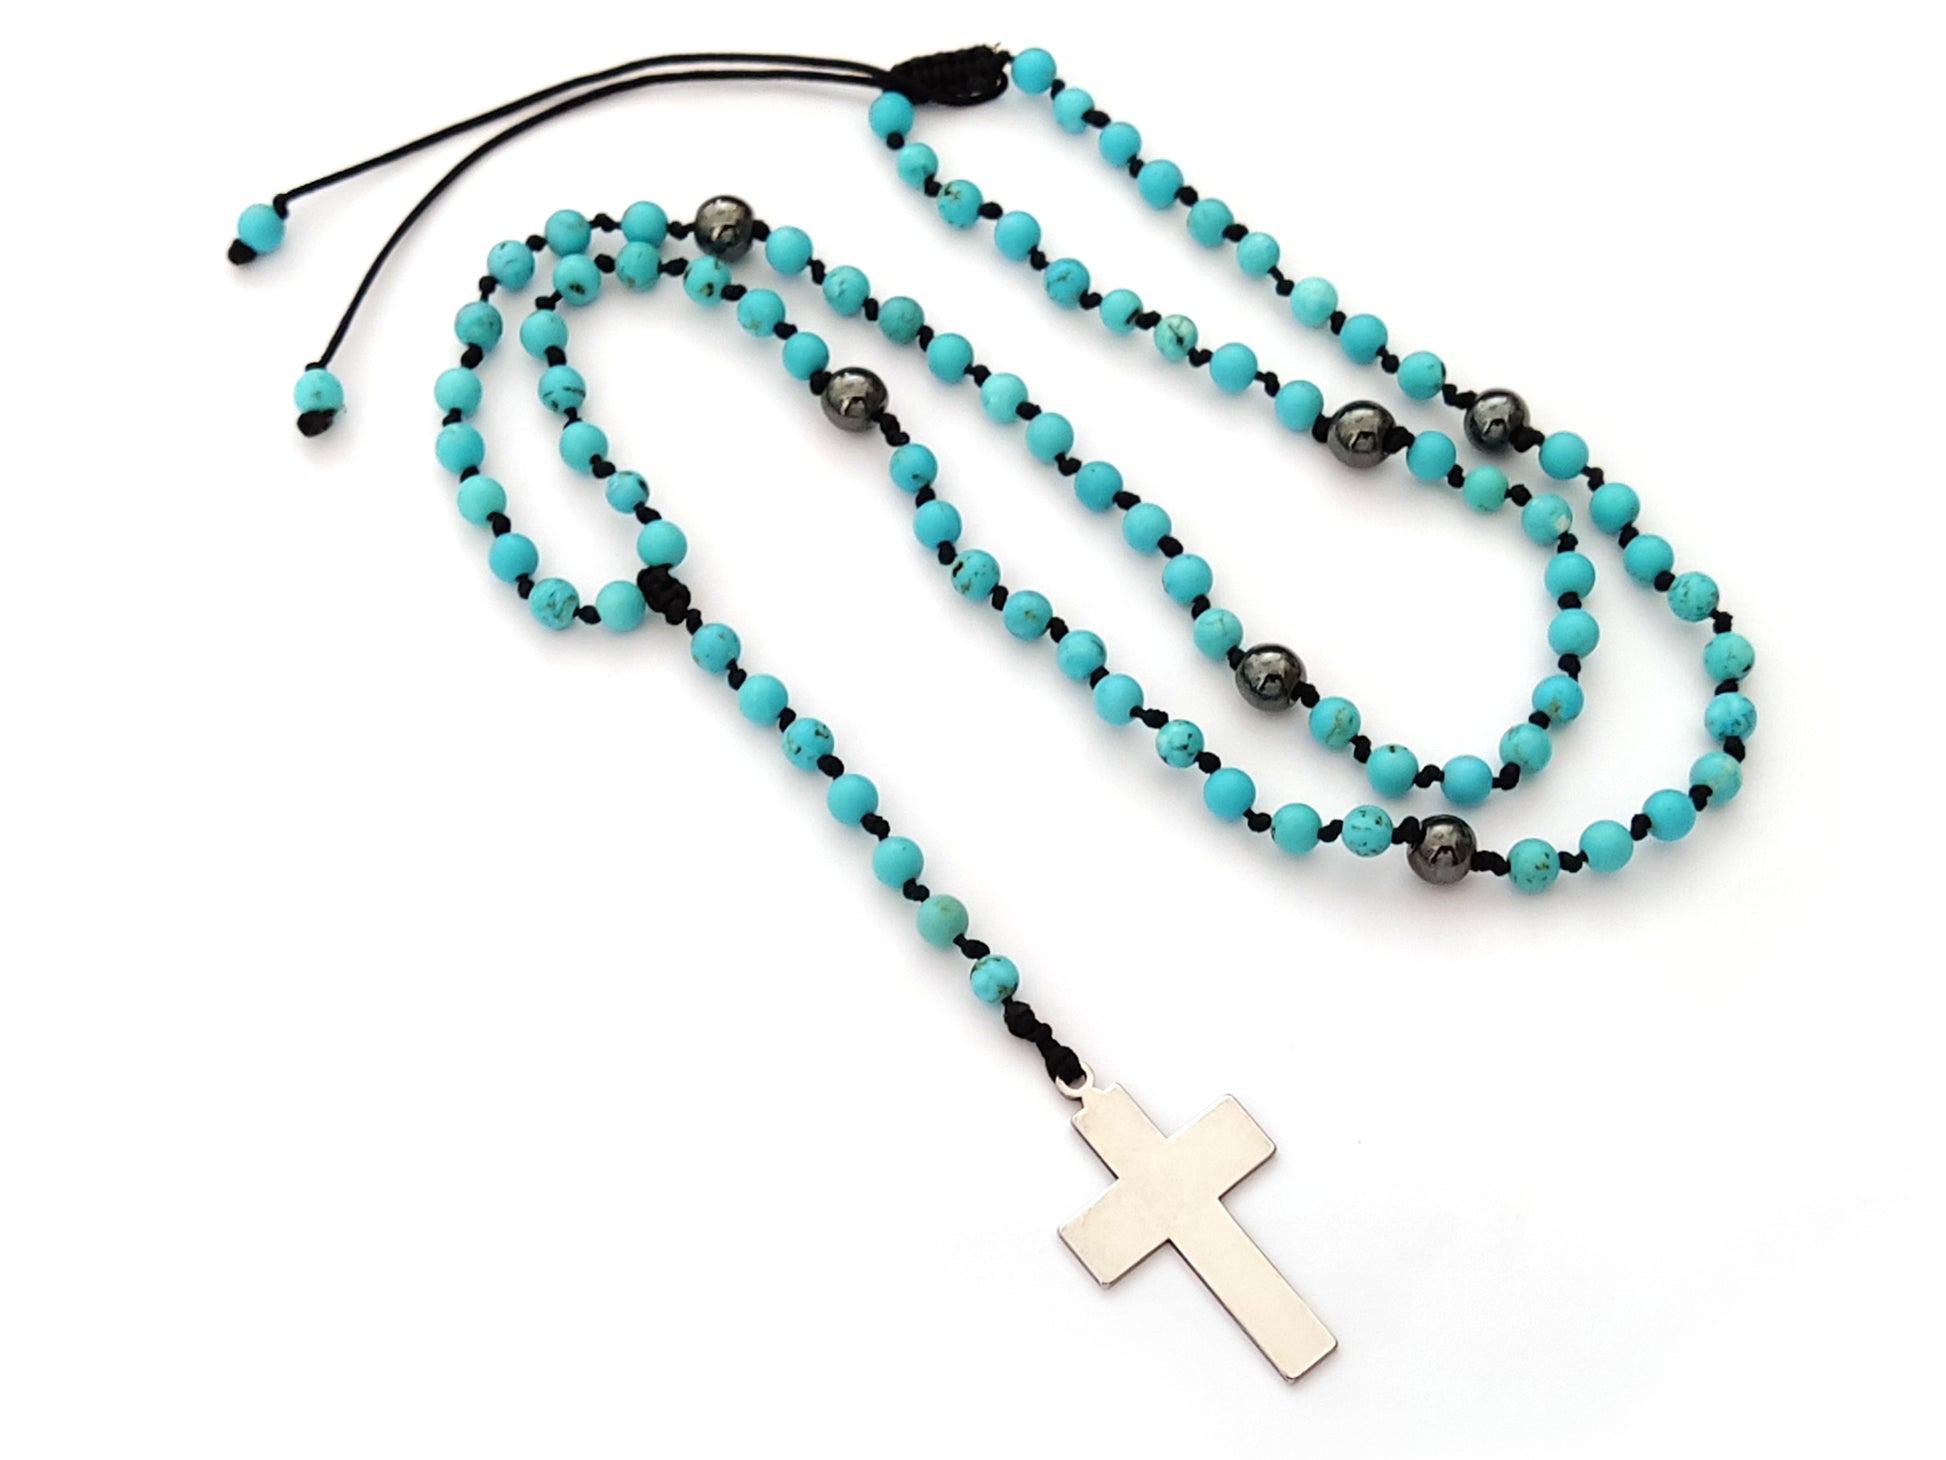 Rosary necklace made of natural tuquoise stones and stainless steek cross in Greece.